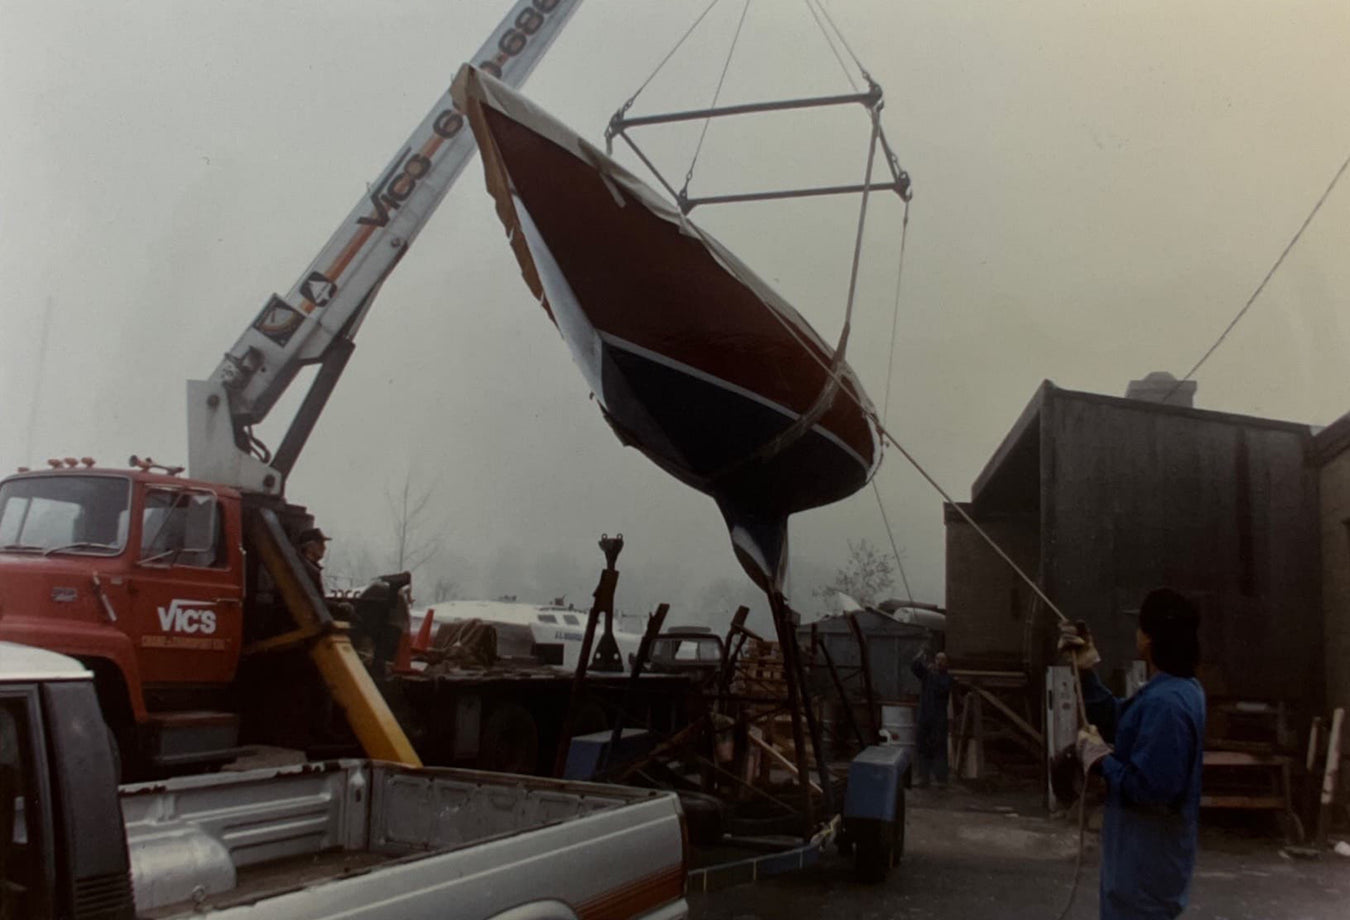 Boat being lifted by a crane